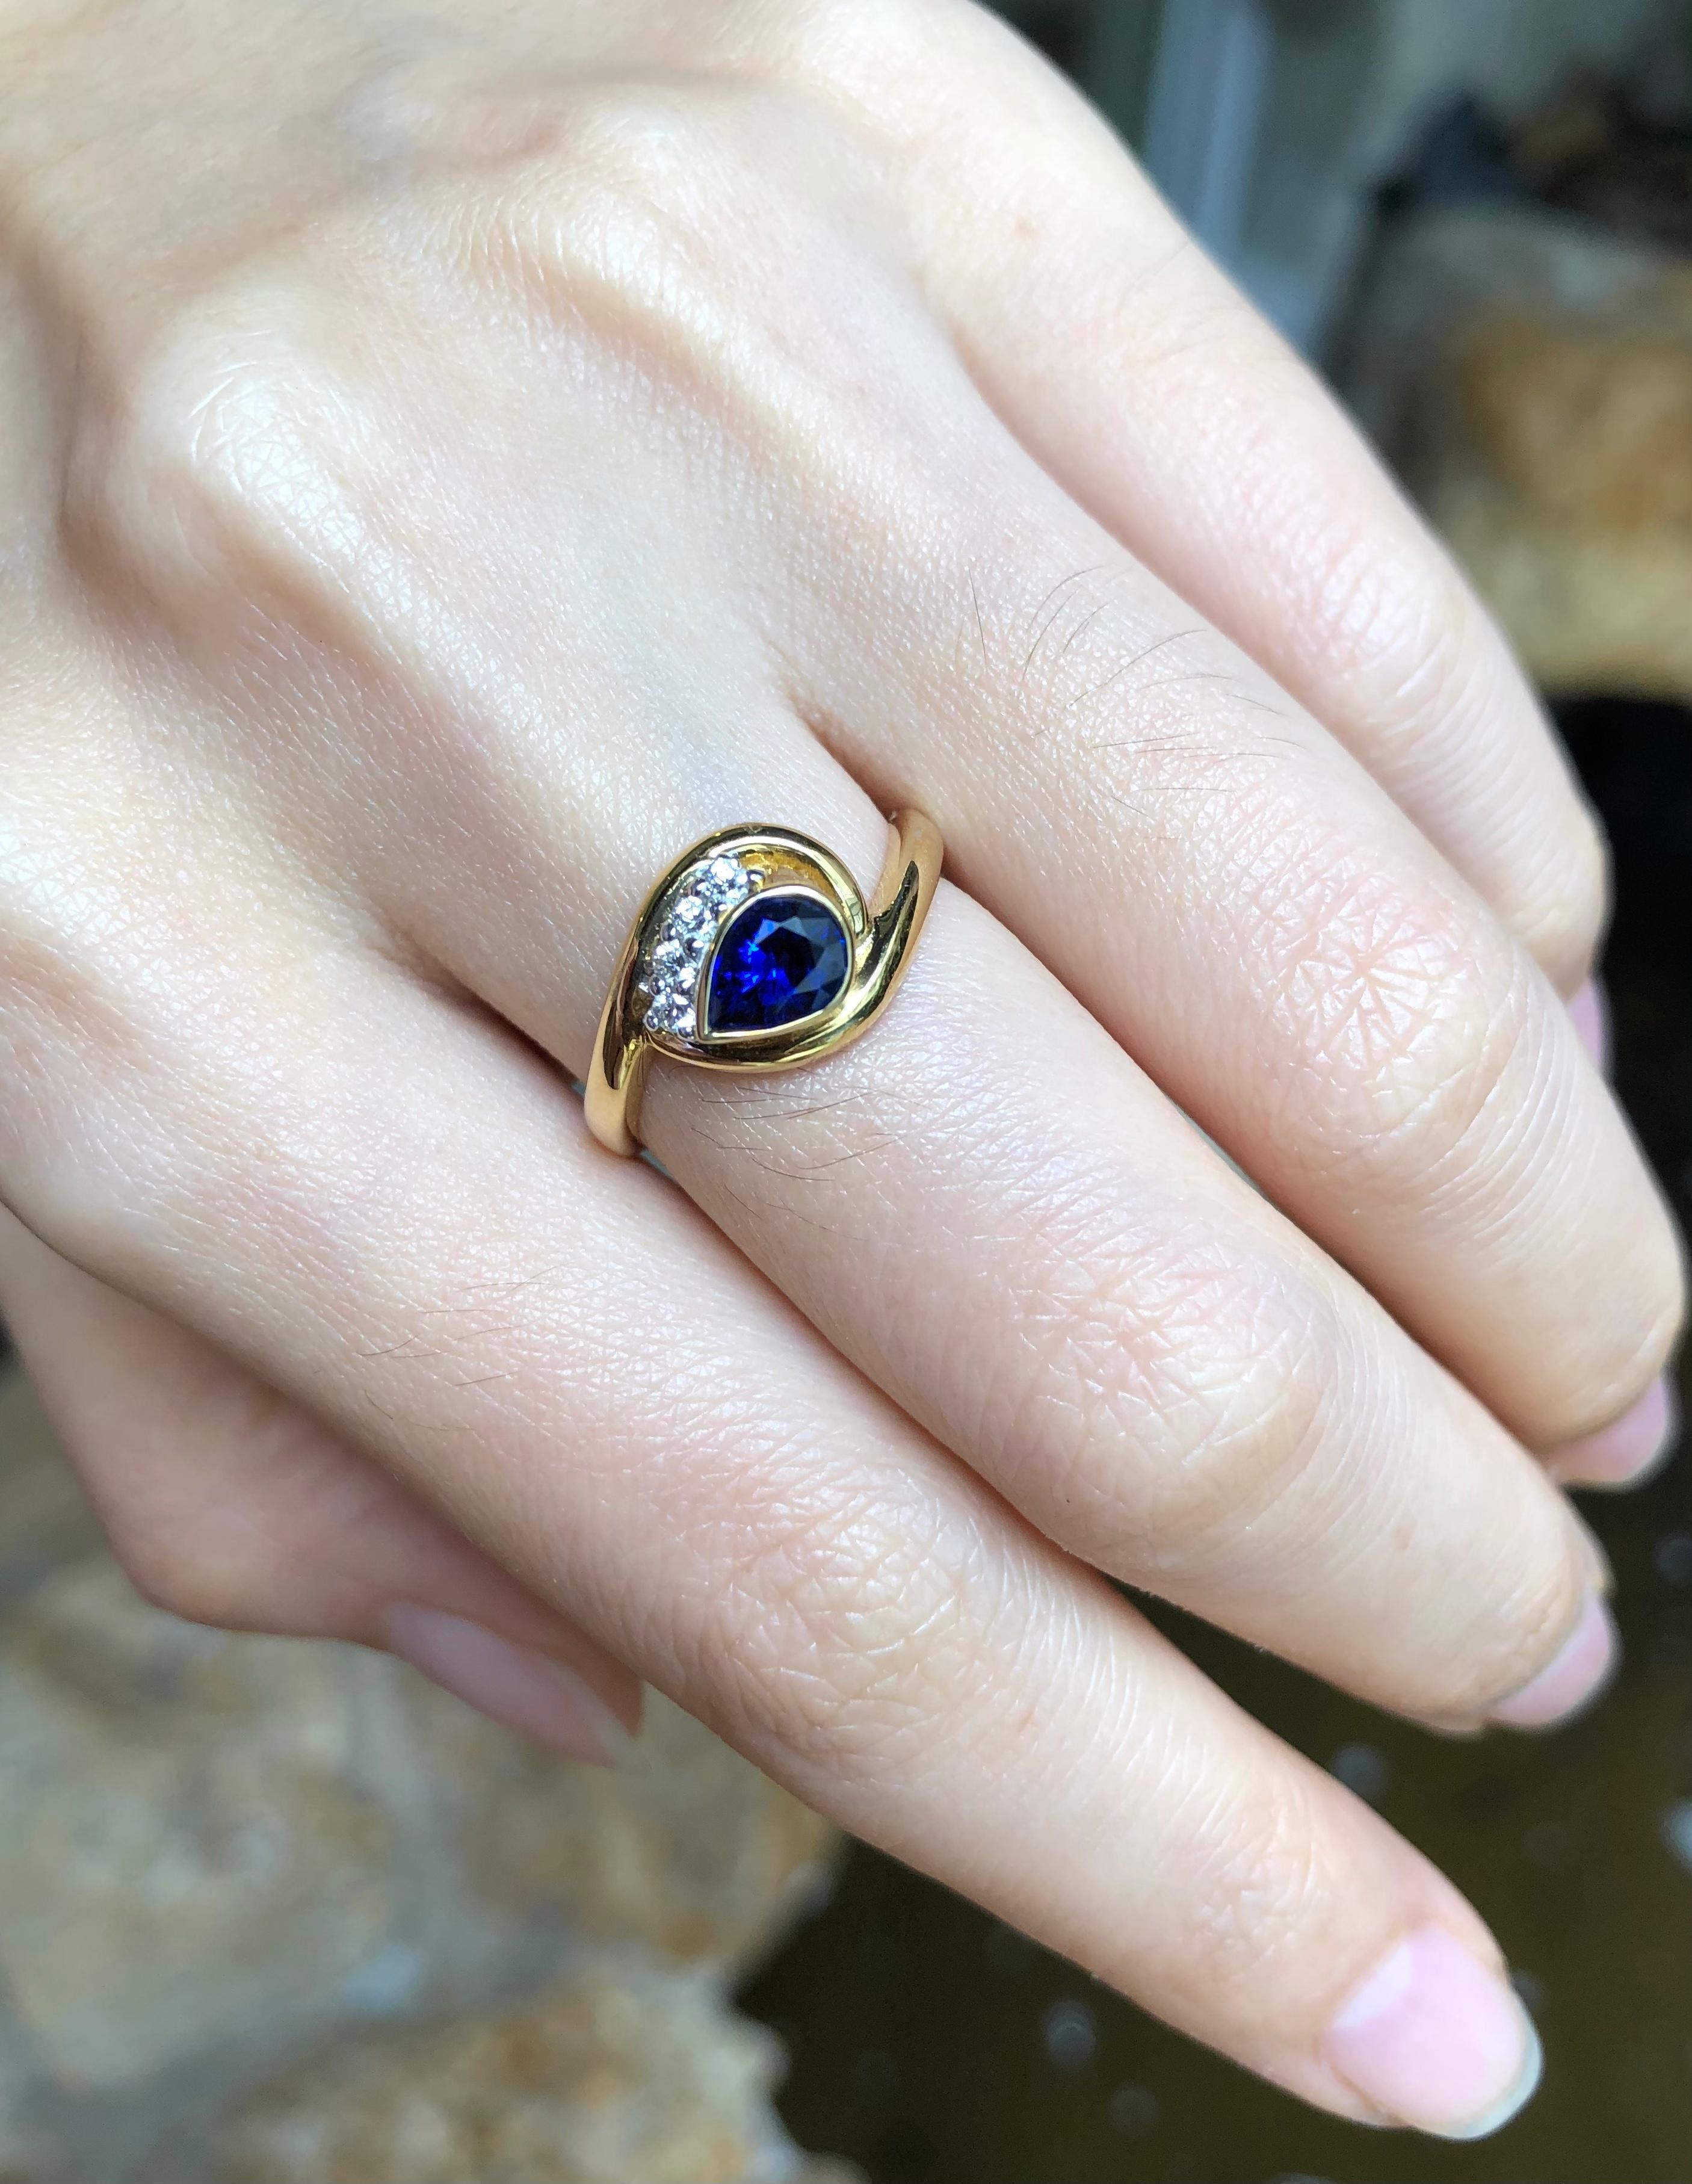 Blue Sapphire 0.69 carat with Diamond 0.08 carat Ring set in 18 Karat Gold Settings

Width:  0.8 cm 
Length: 0.8 cm
Ring Size: 52
Total Weight: 4.85 grams

